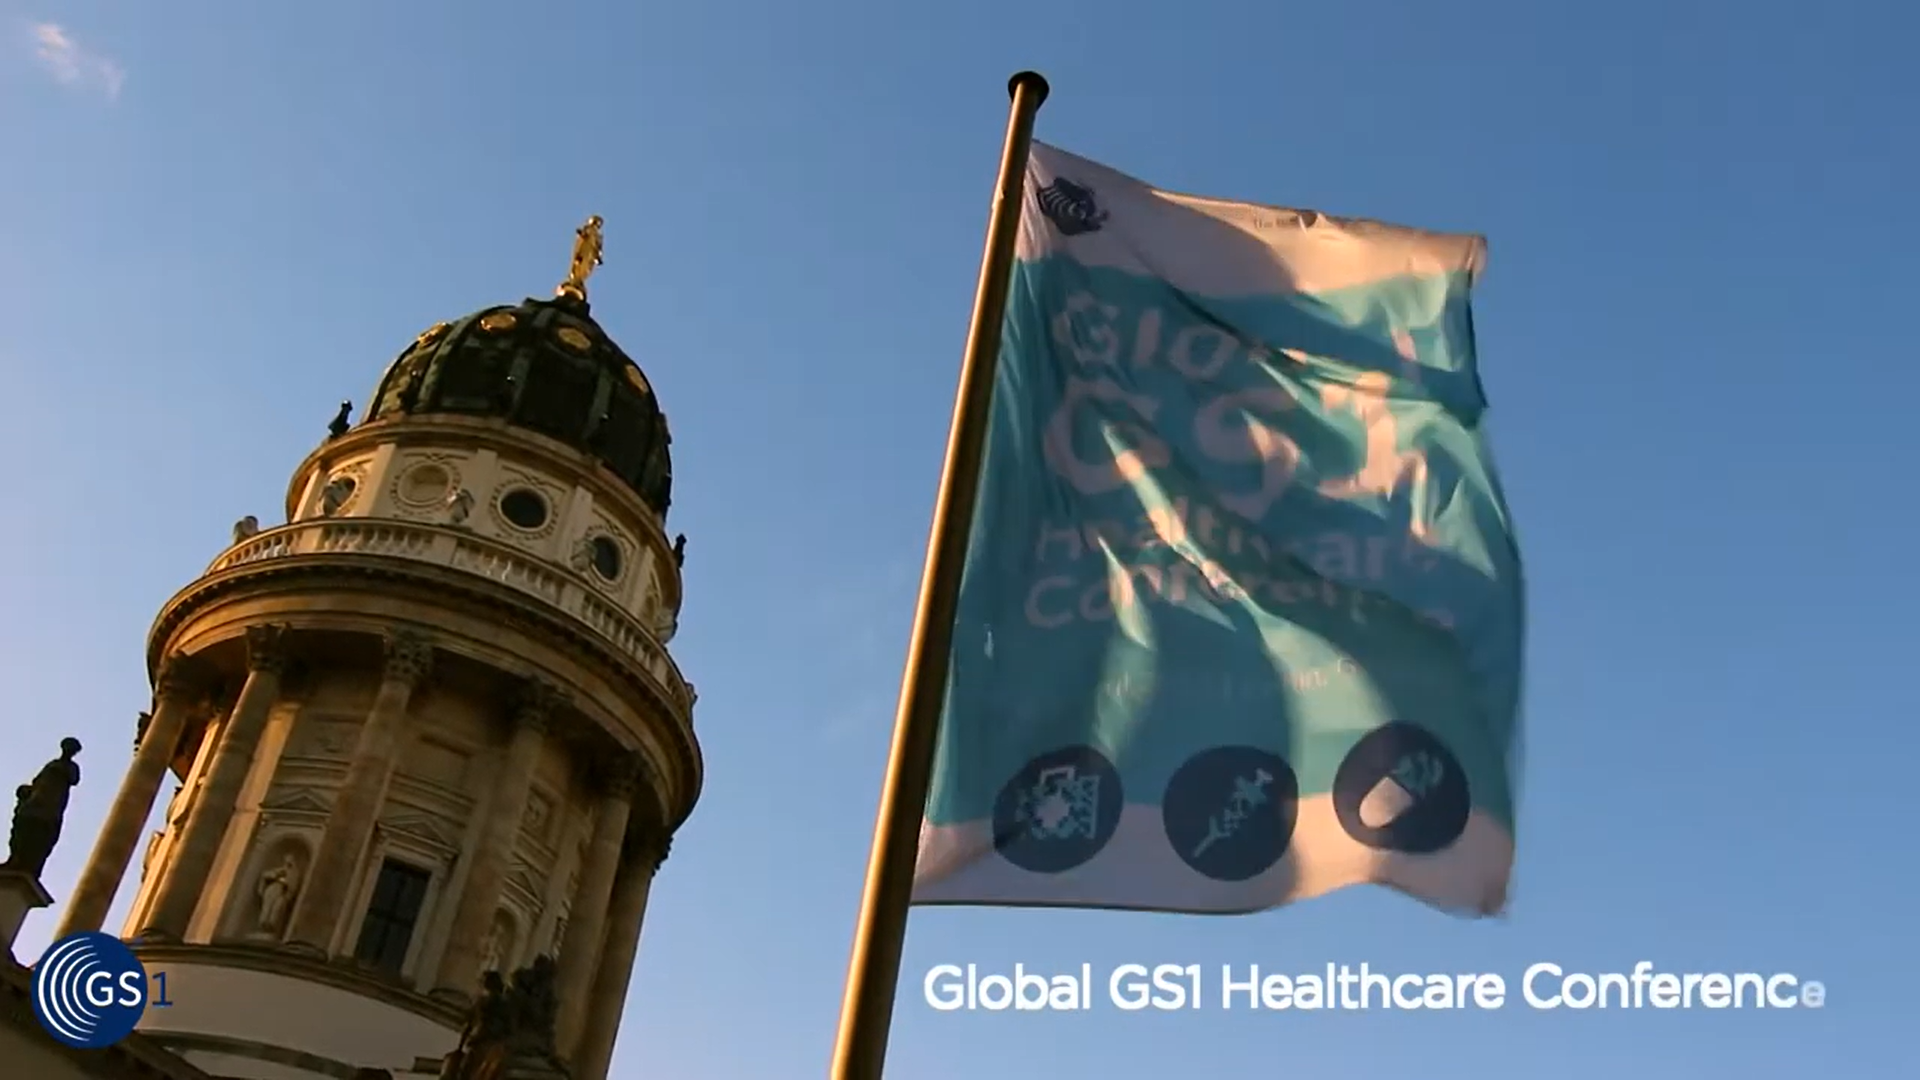 Global GS1 Healthcare Conference